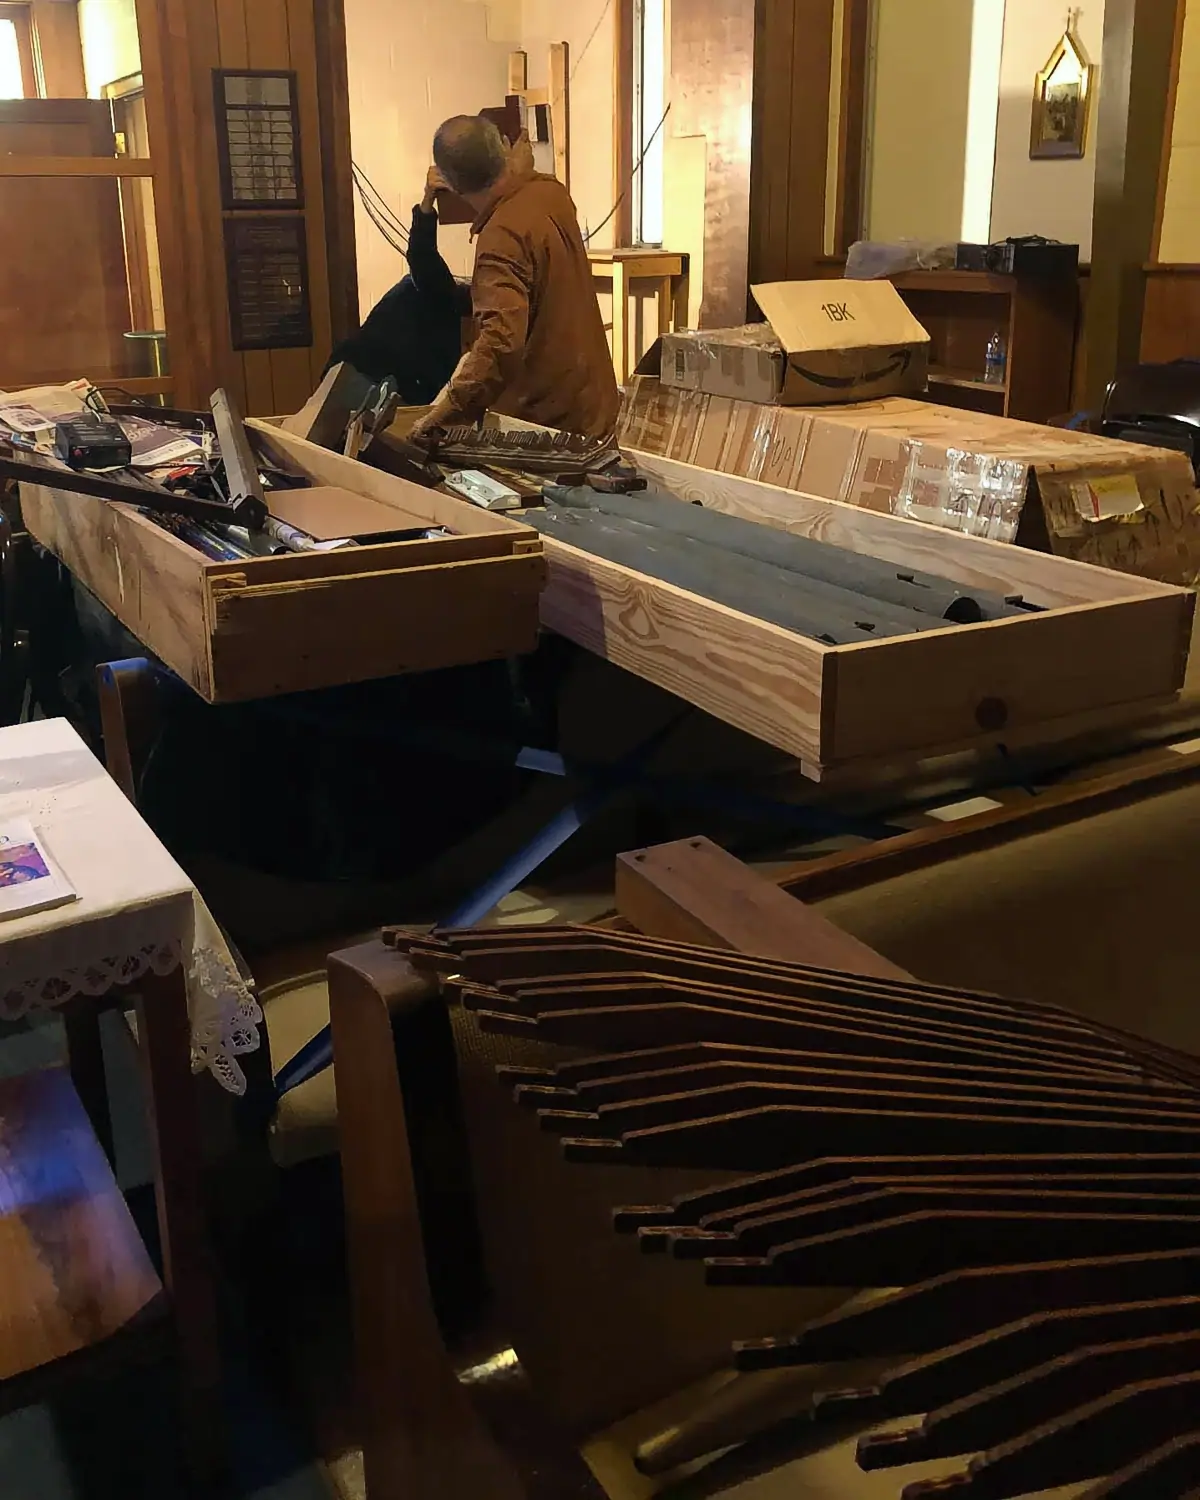 The new organ being assembled on site